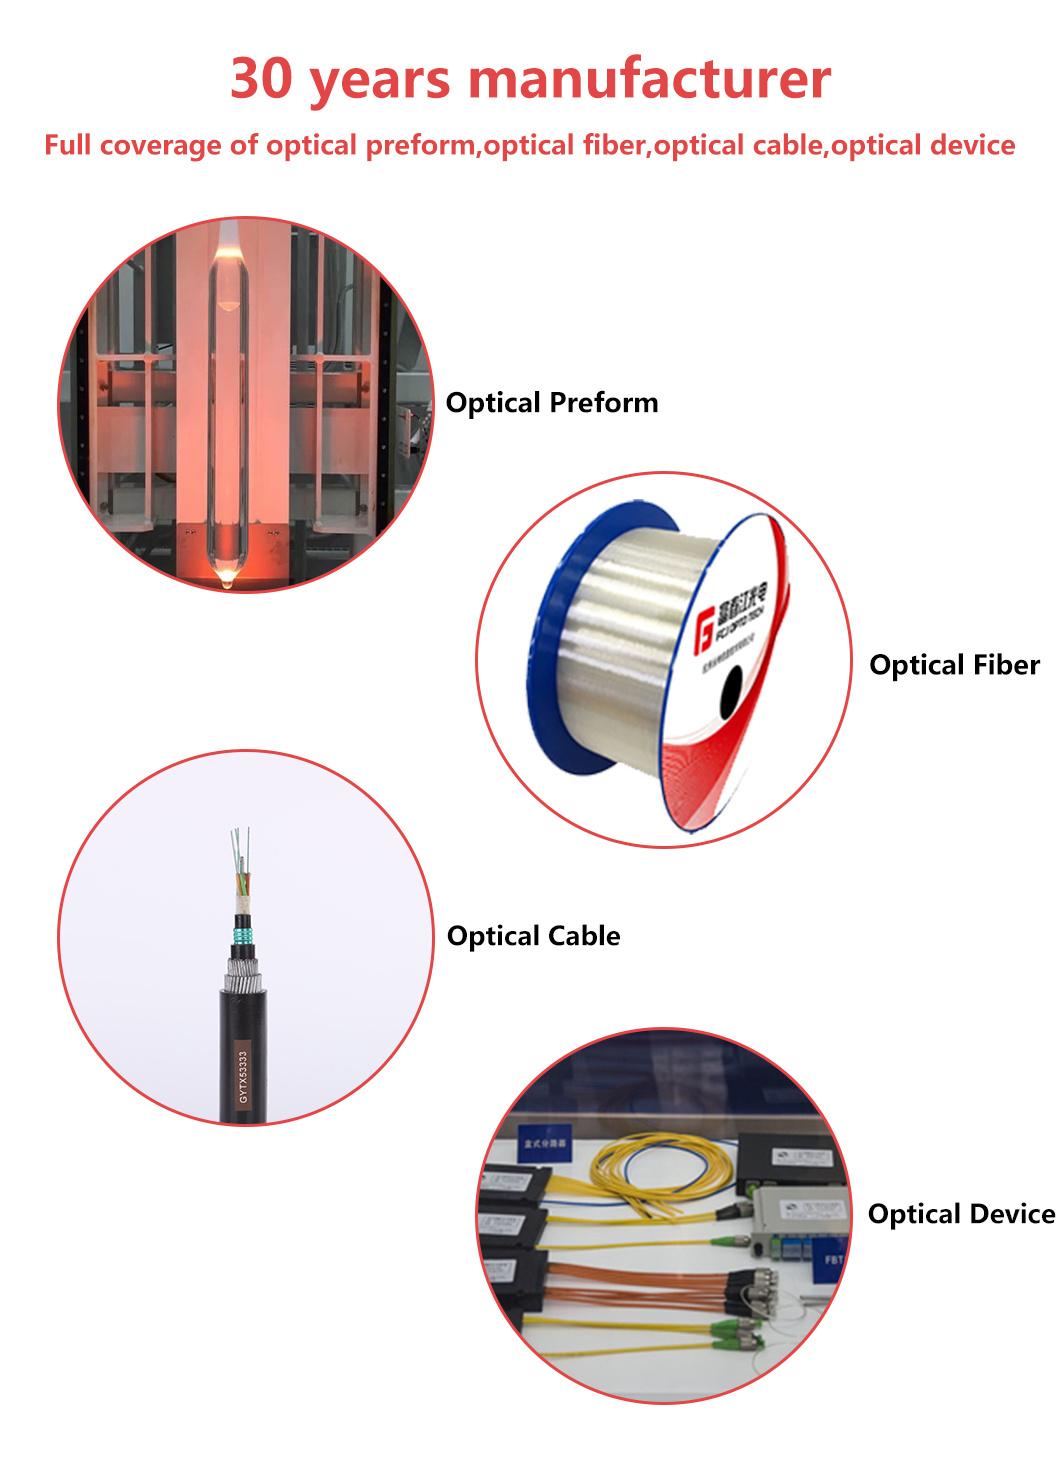 ADSS Optical Fiber Cable All Dielectric Self-Supporting Armid Yarns